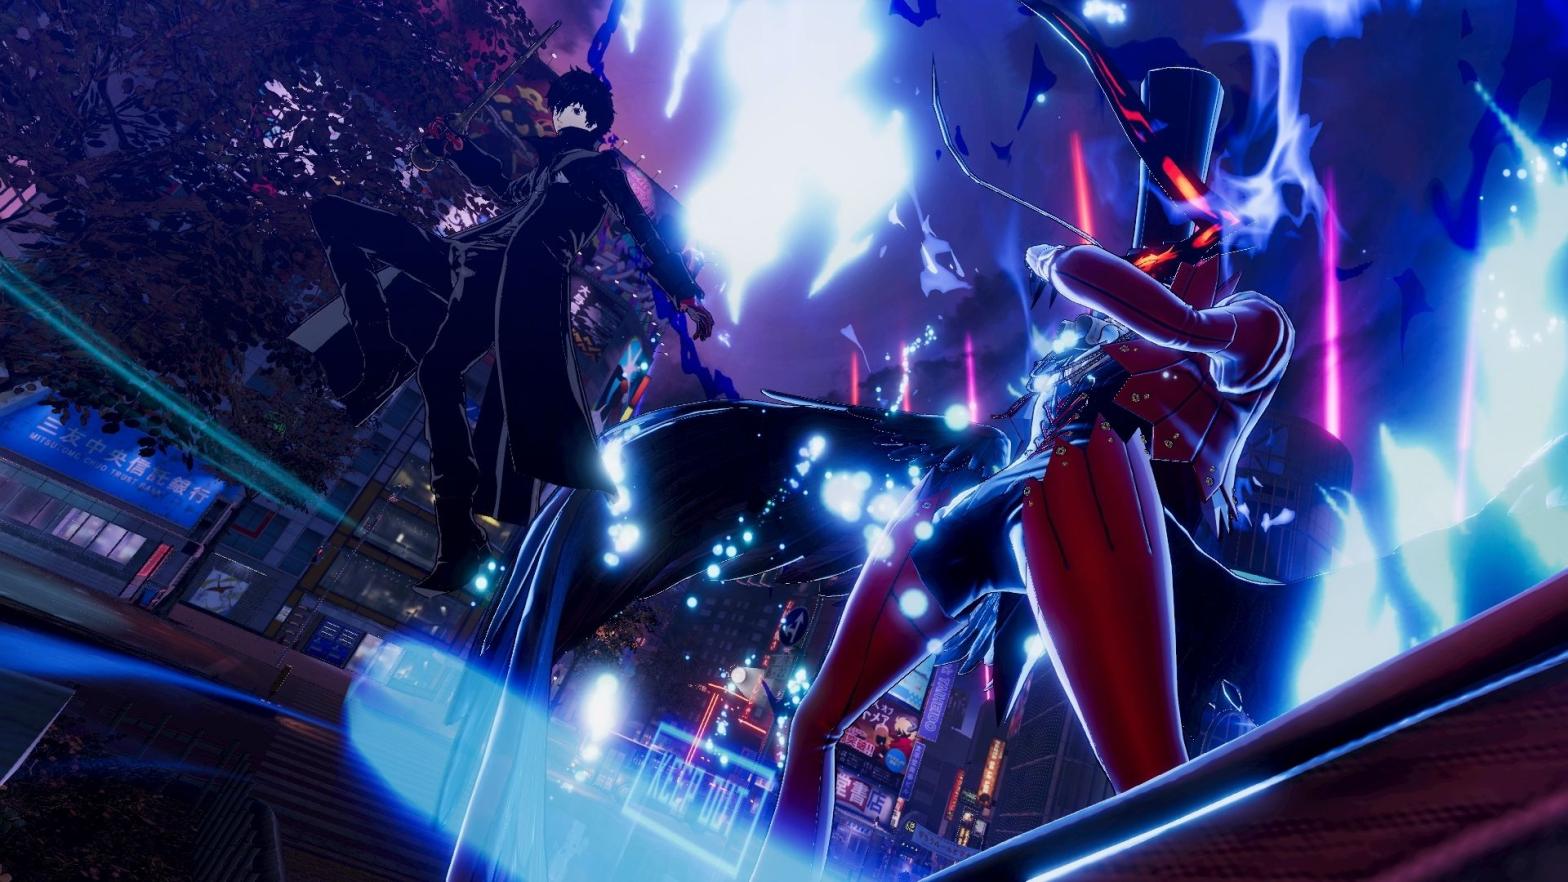 It's a shame Arsene has such a cool design but is quickly replaced by boring-looking but more powerful personas. (Screenshot: Atlus)